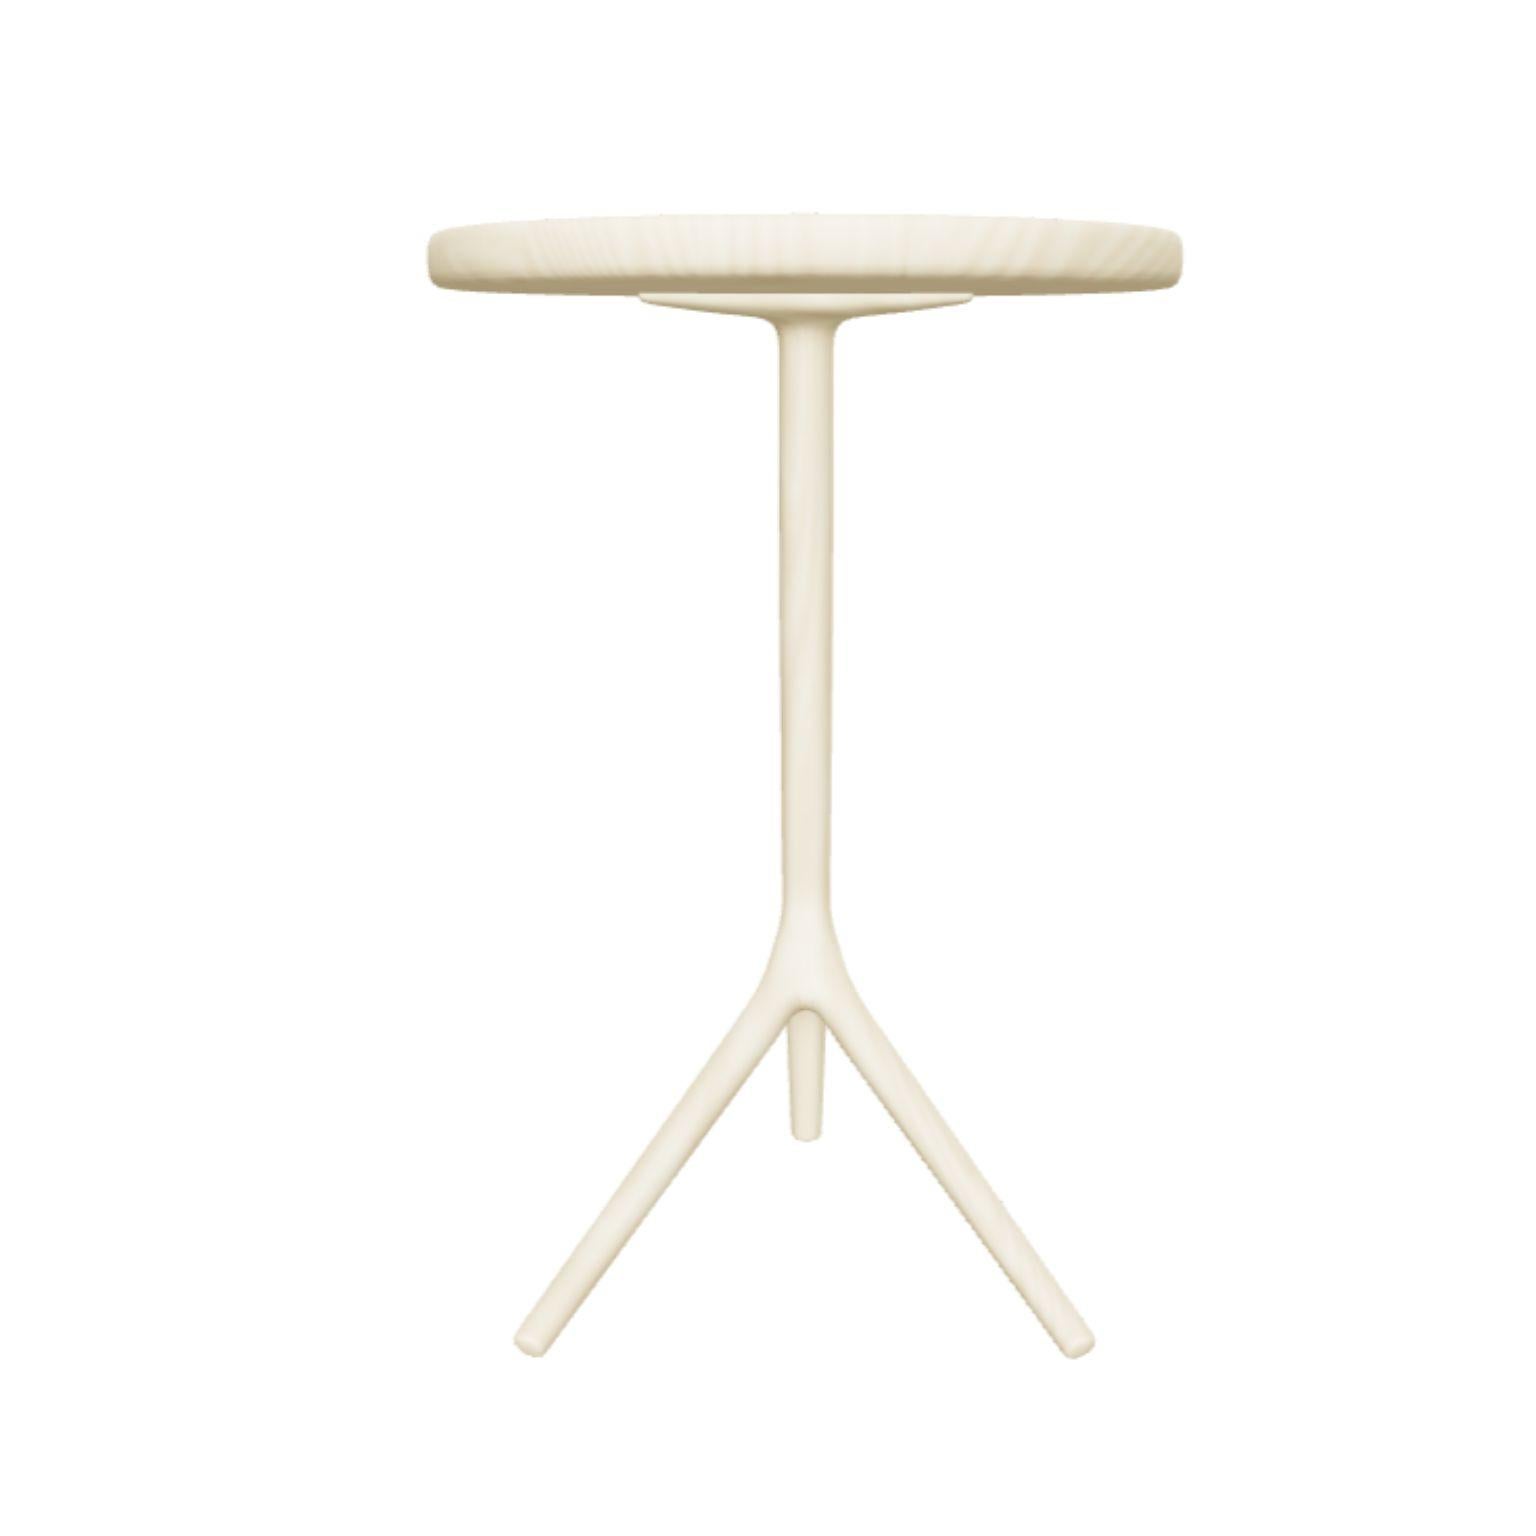 White ash short tripod table by Fernweh Woodworking
Dimensions: Ø 40.7 x H 50.8 cm 
Materials: White Ash 

Different size and wood options available.

Size options: 
Short: Ø 40.7 x H 50.8 cm 
Medium: Ø 40.7 x H 57.2 cm 
Tall: Ø 40.7 x H